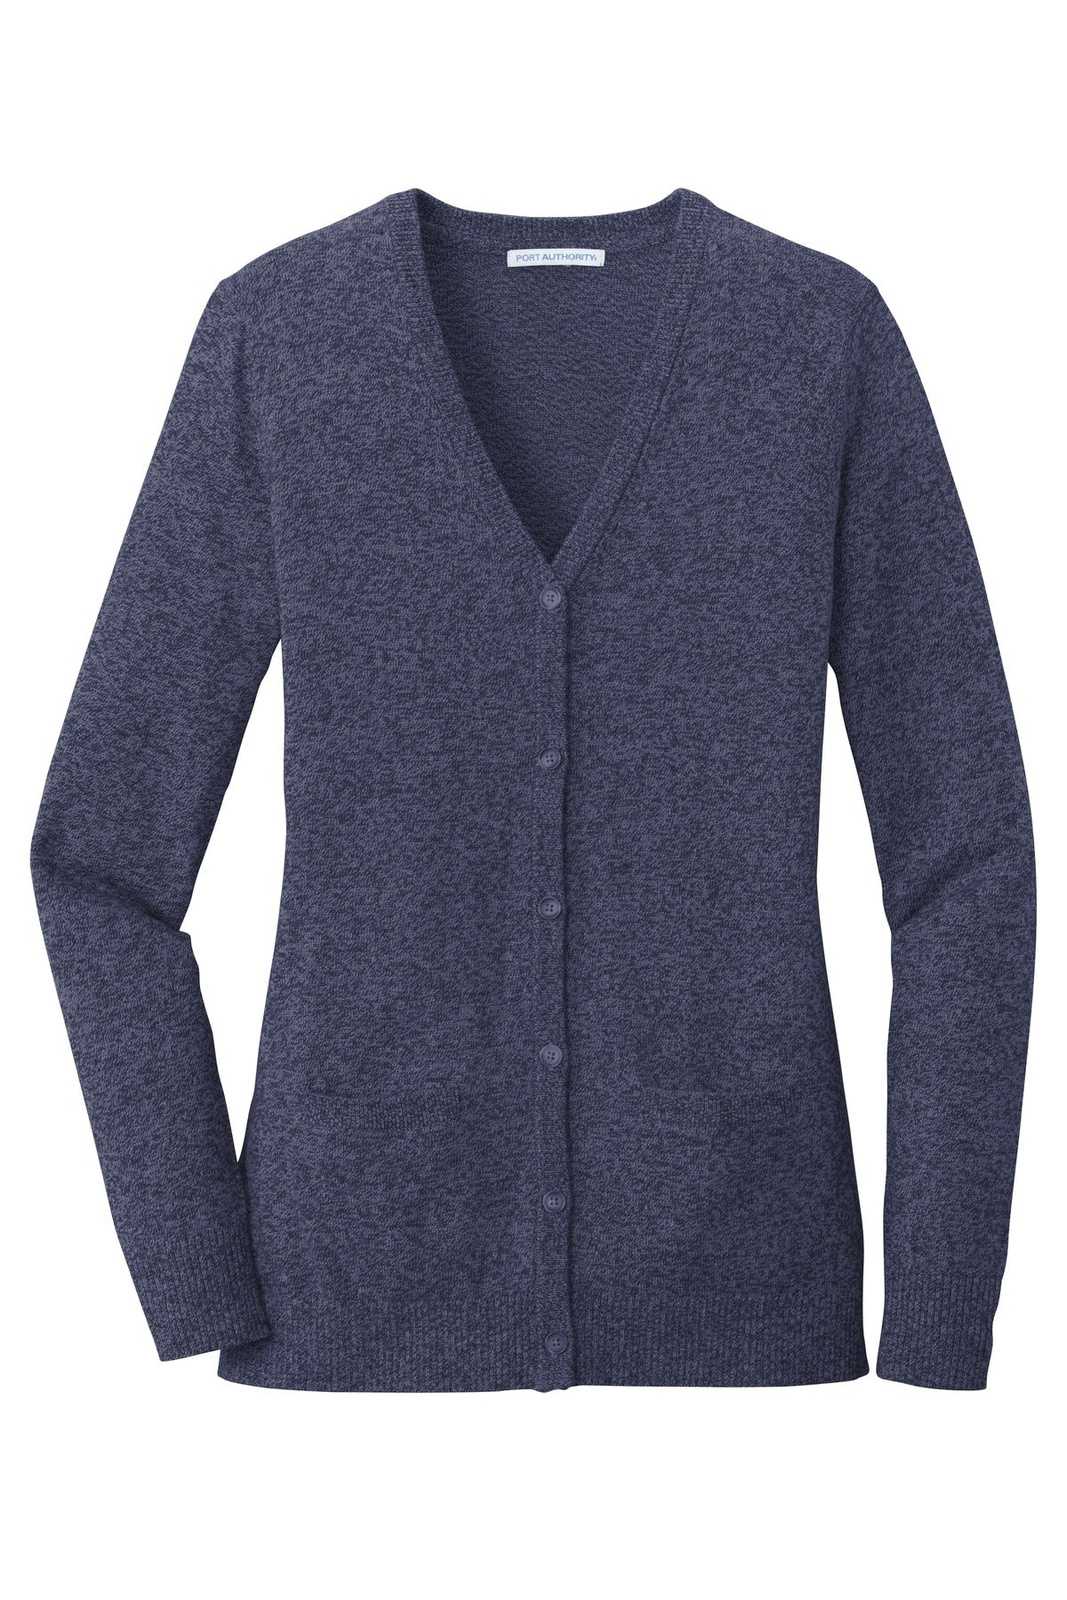 Port Authority LSW415 Ladies Marled Cardigan Sweater - Navy Marl - HIT a Double - 5